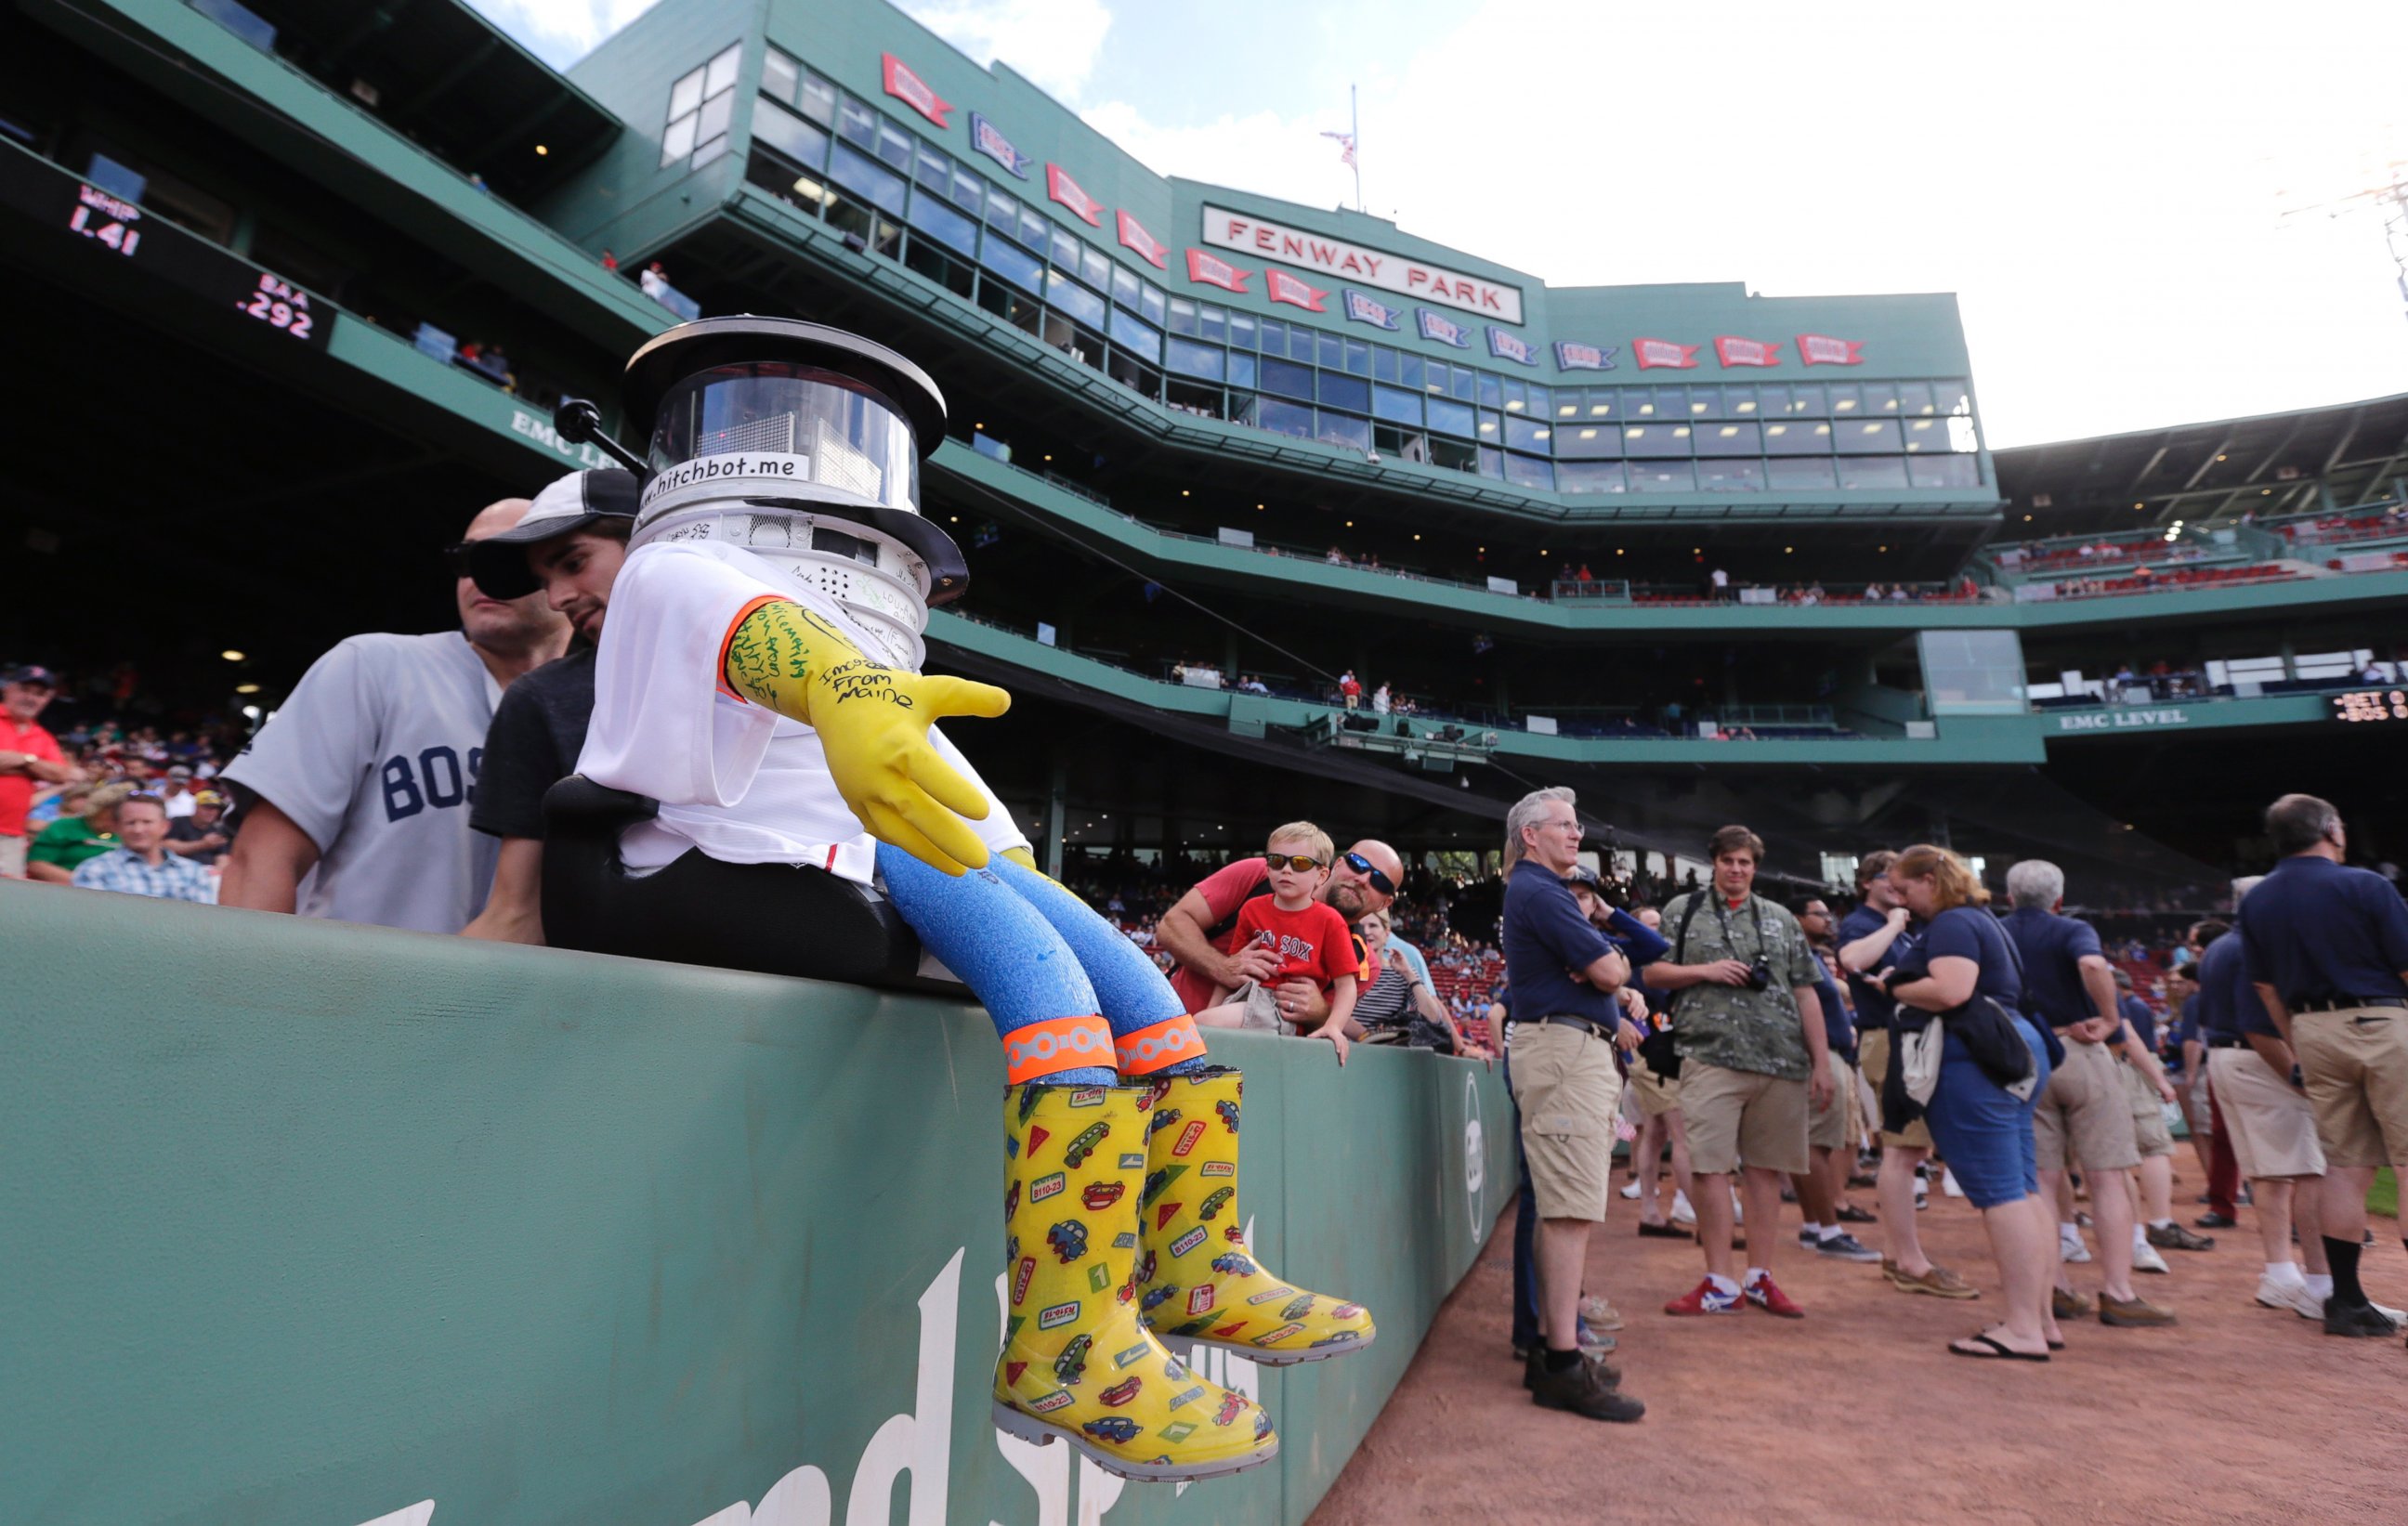 PHOTO: As pre-game activity begins, HitchBOT rests on the wall along the first base line before a baseball game at Fenway Park between the Boston Red Sox and Detroit Tigers in Boston, Friday, July 24, 2015.